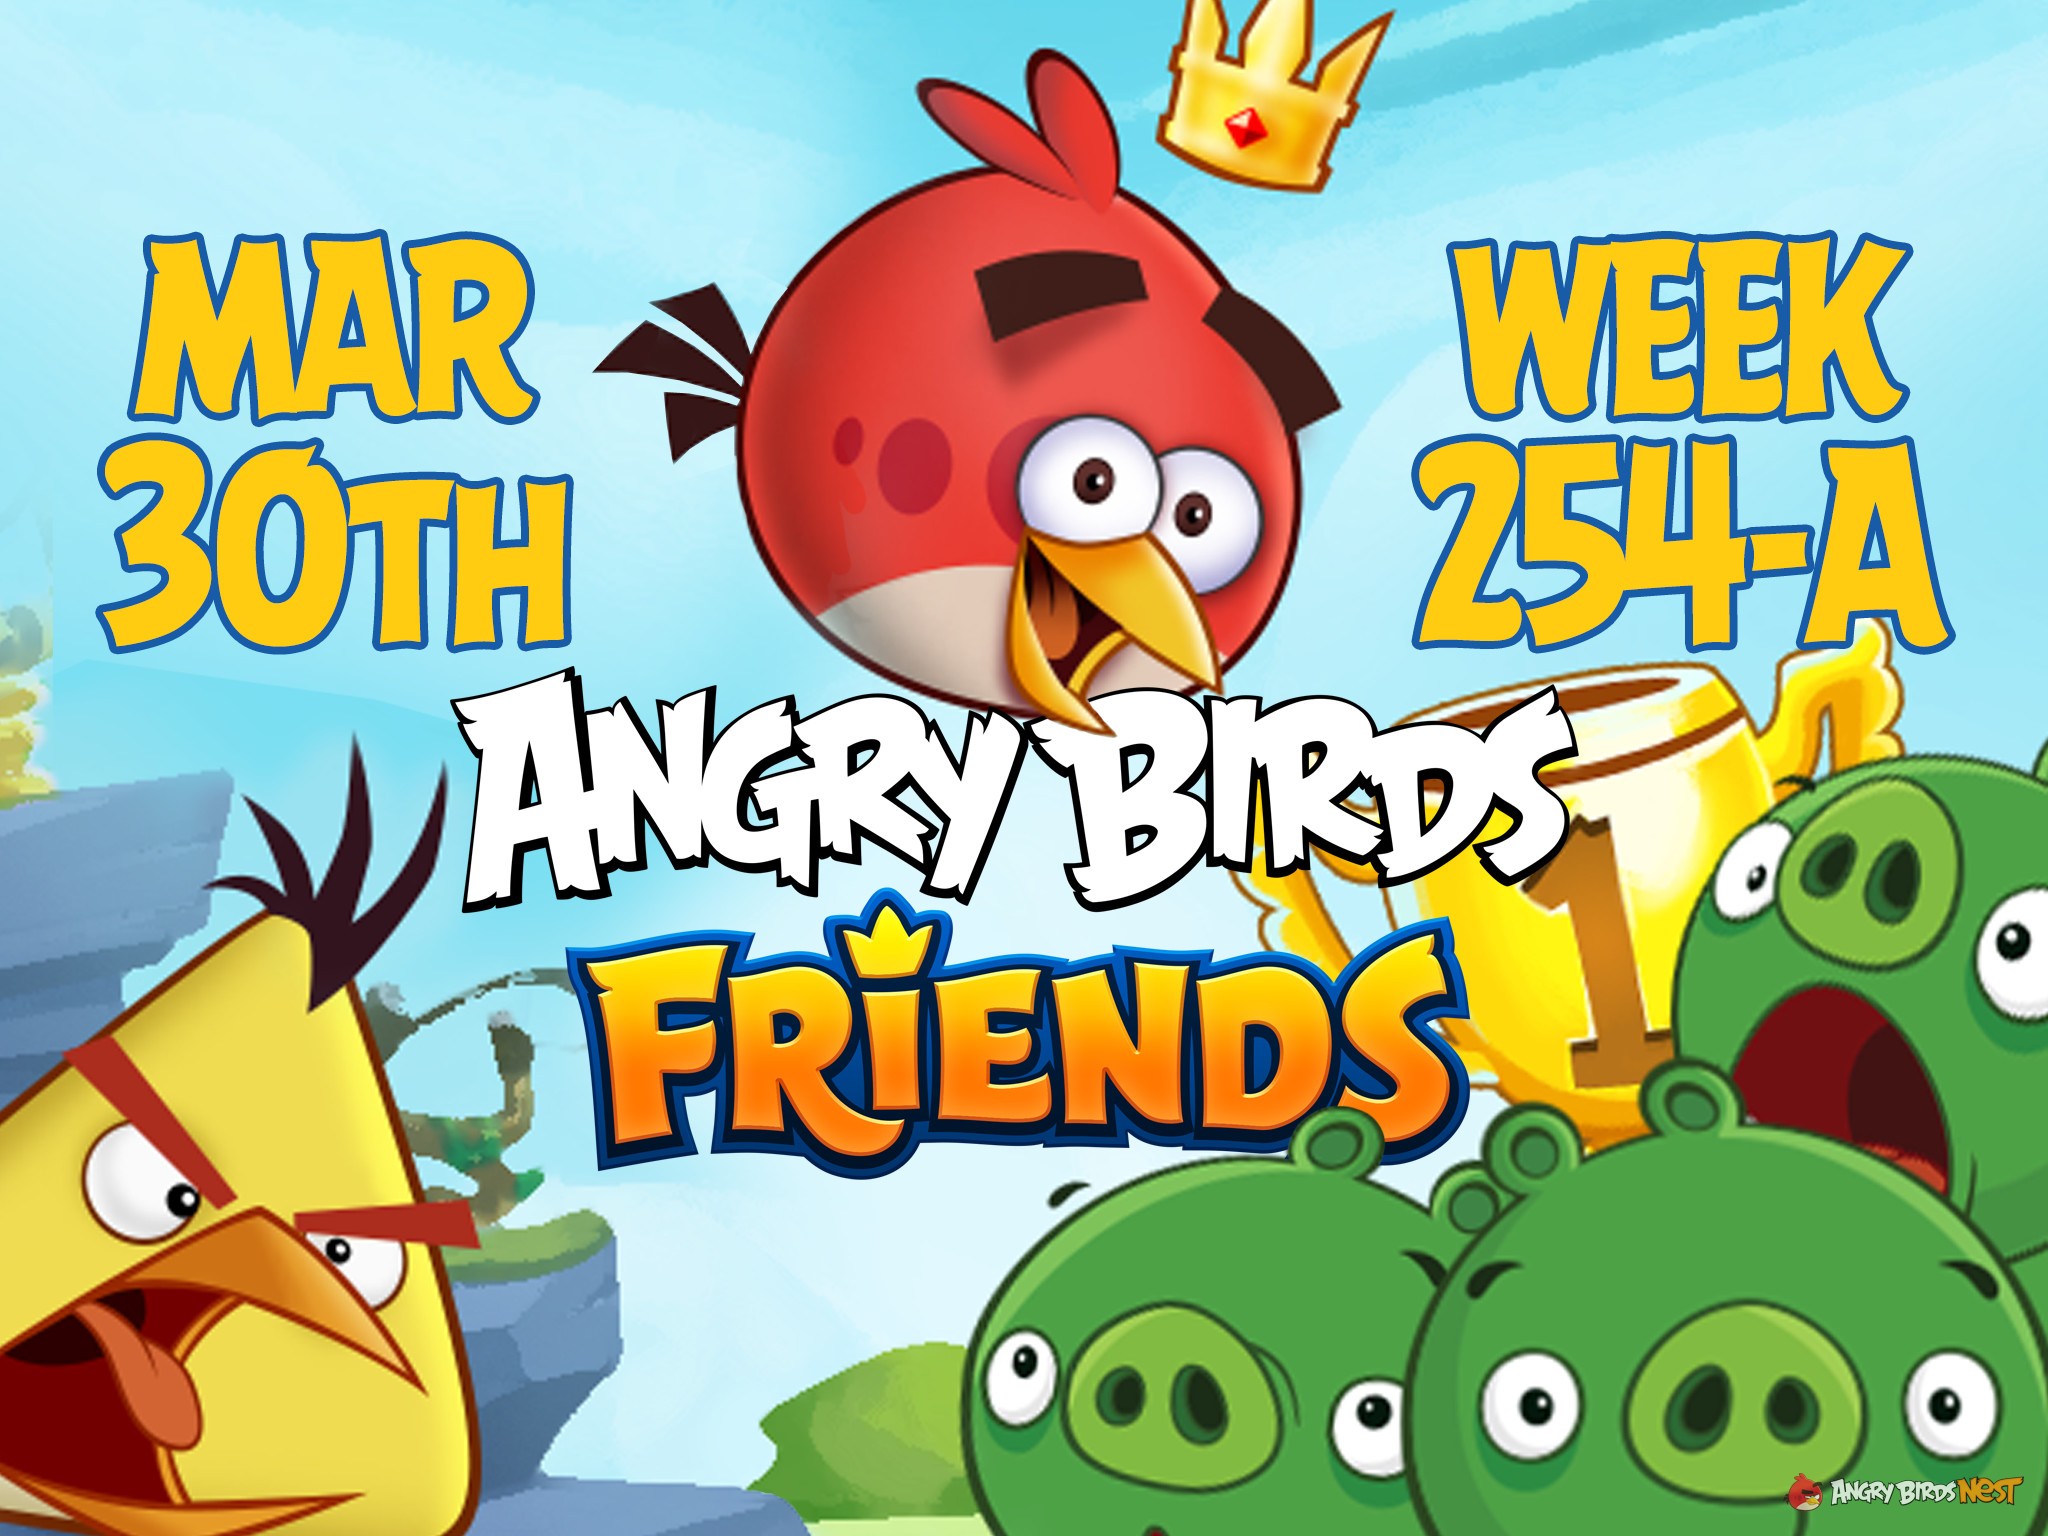 Angry Birds Friends Tournament Week 254-A Feature Image